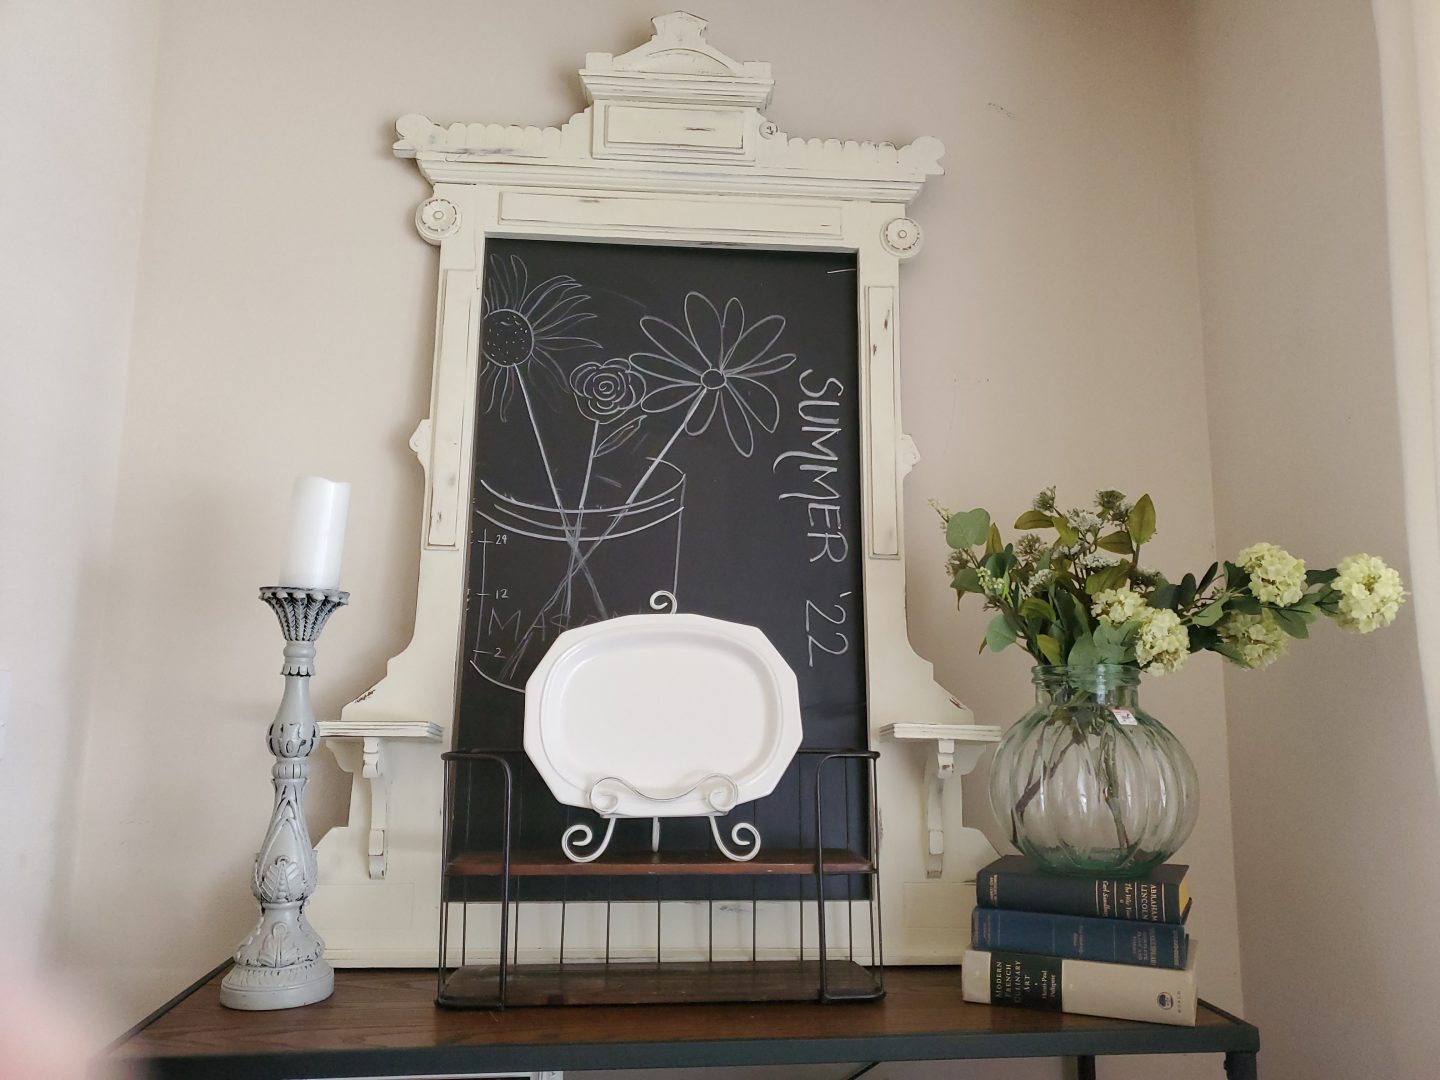 Decorate with light & dark colors. White platter in front of a blackboard pops!